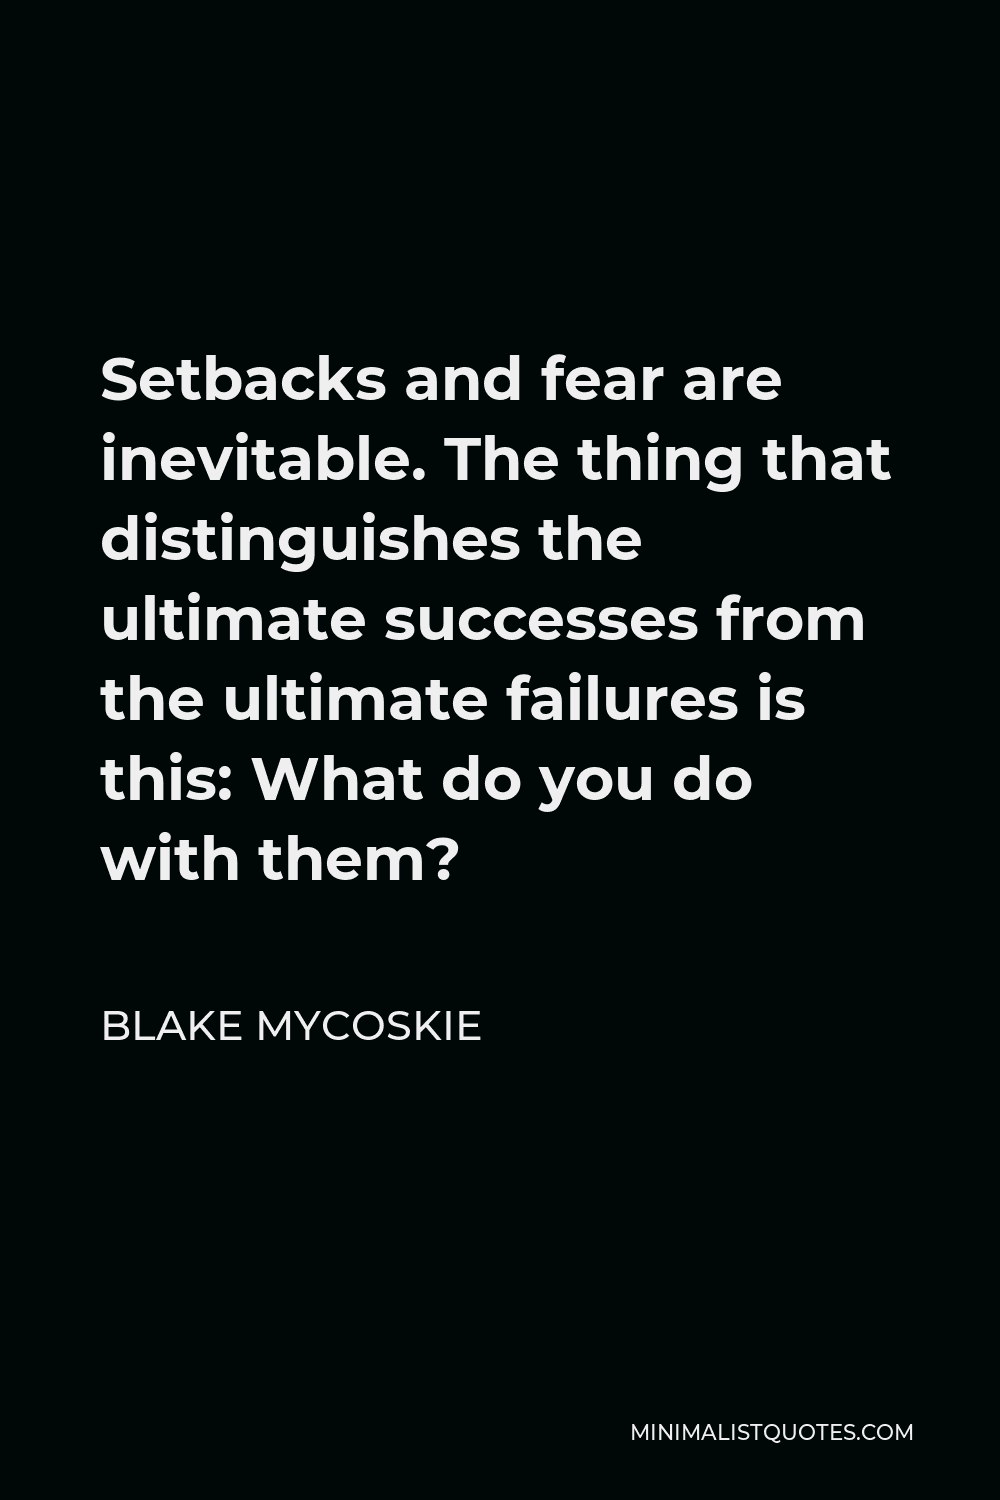 Blake Mycoskie Quote - Setbacks and fear are inevitable. The thing that distinguishes the ultimate successes from the ultimate failures is this: What do you do with them?